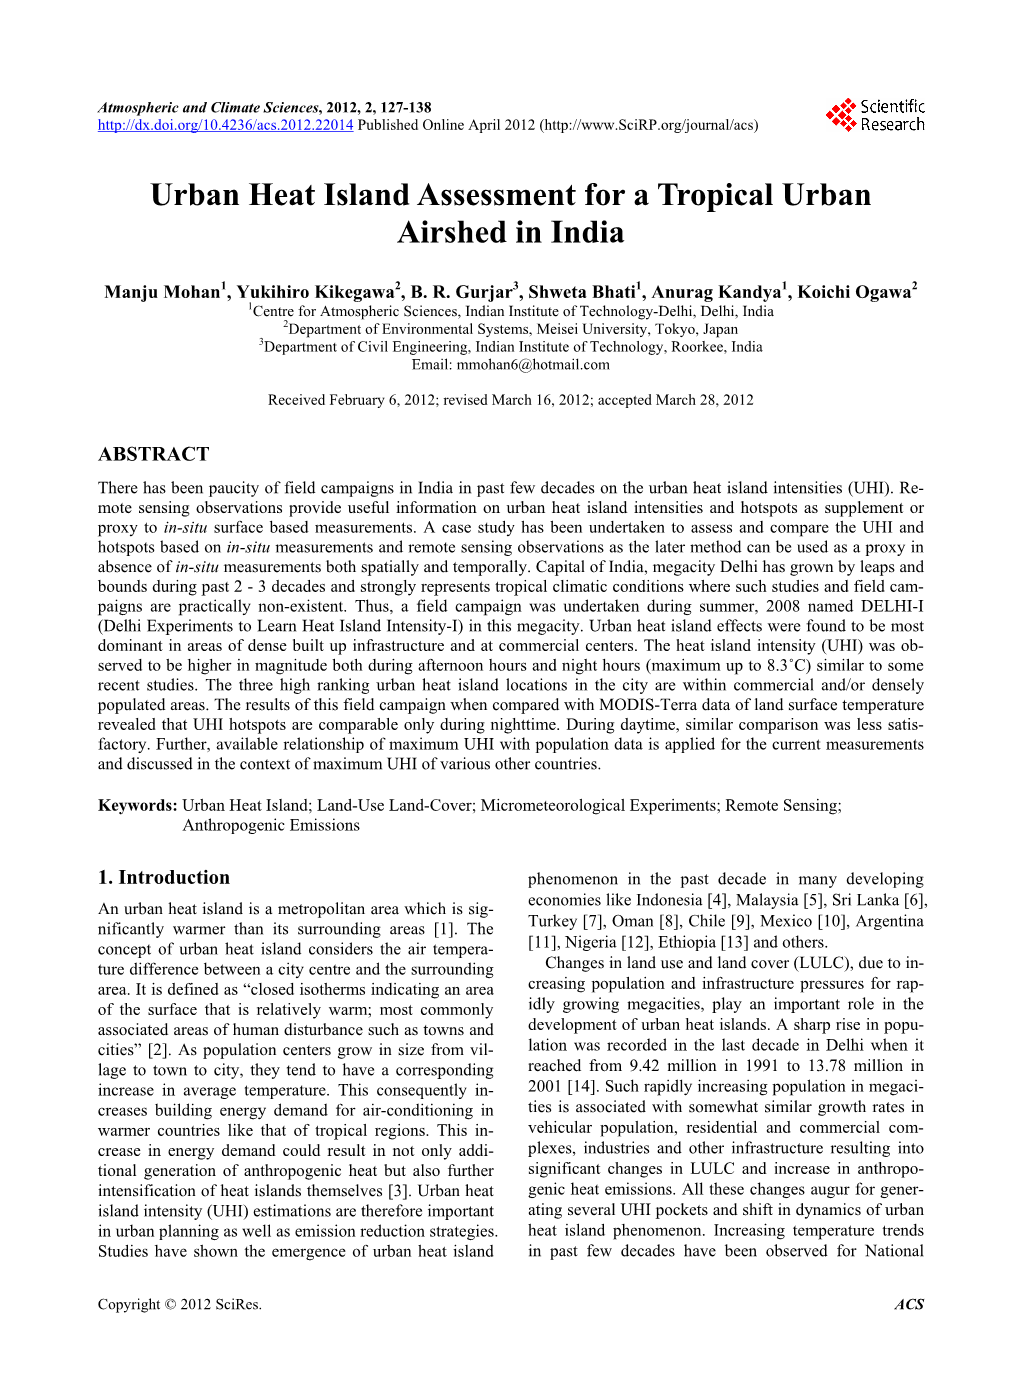 Urban Heat Island Assessment for a Tropical Urban Airshed in India